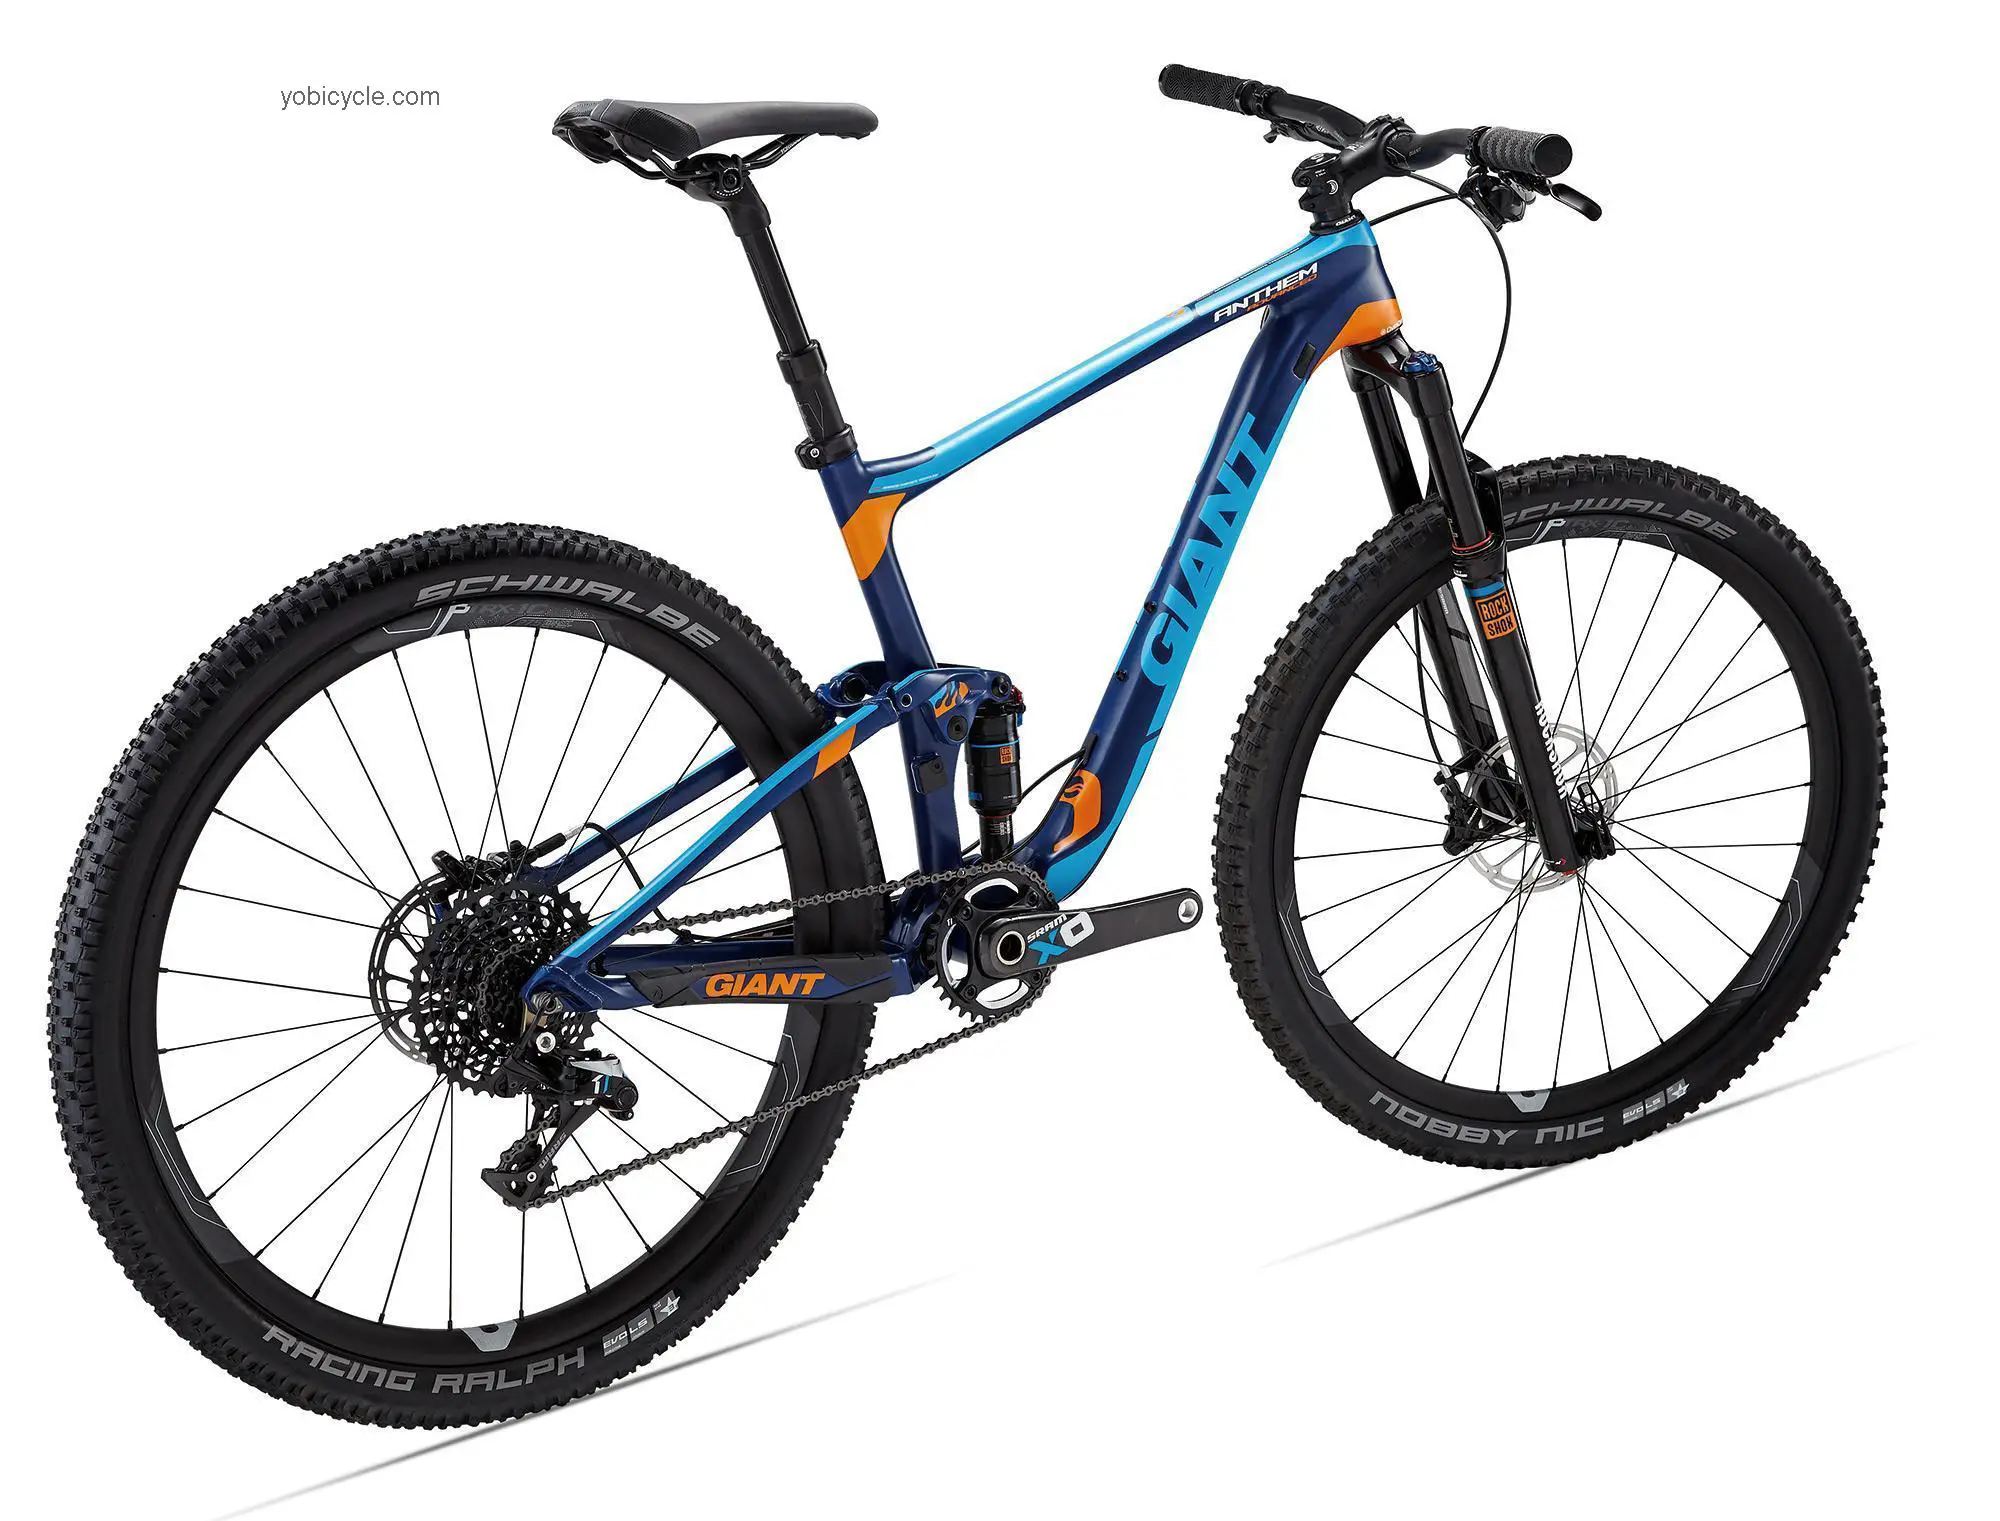 Giant Anthem Advanced SX 27.5 2015 comparison online with competitors